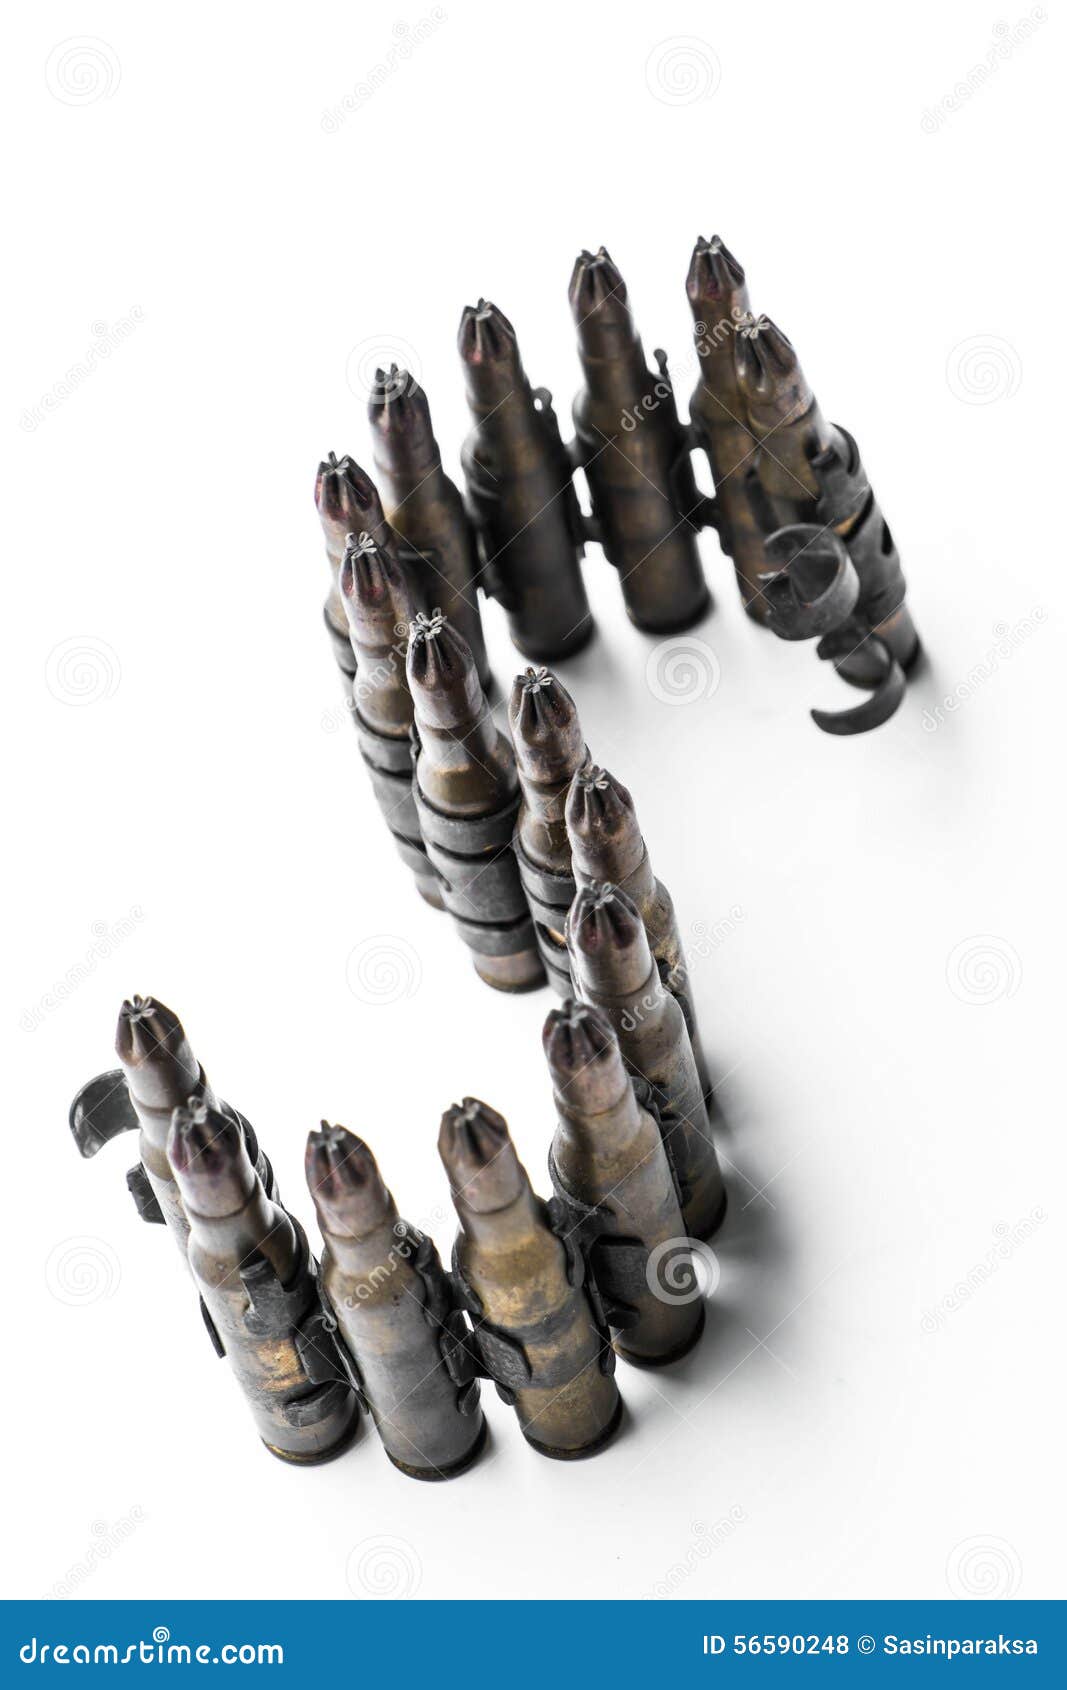 bullets abstract arrange in s alphabet on white background